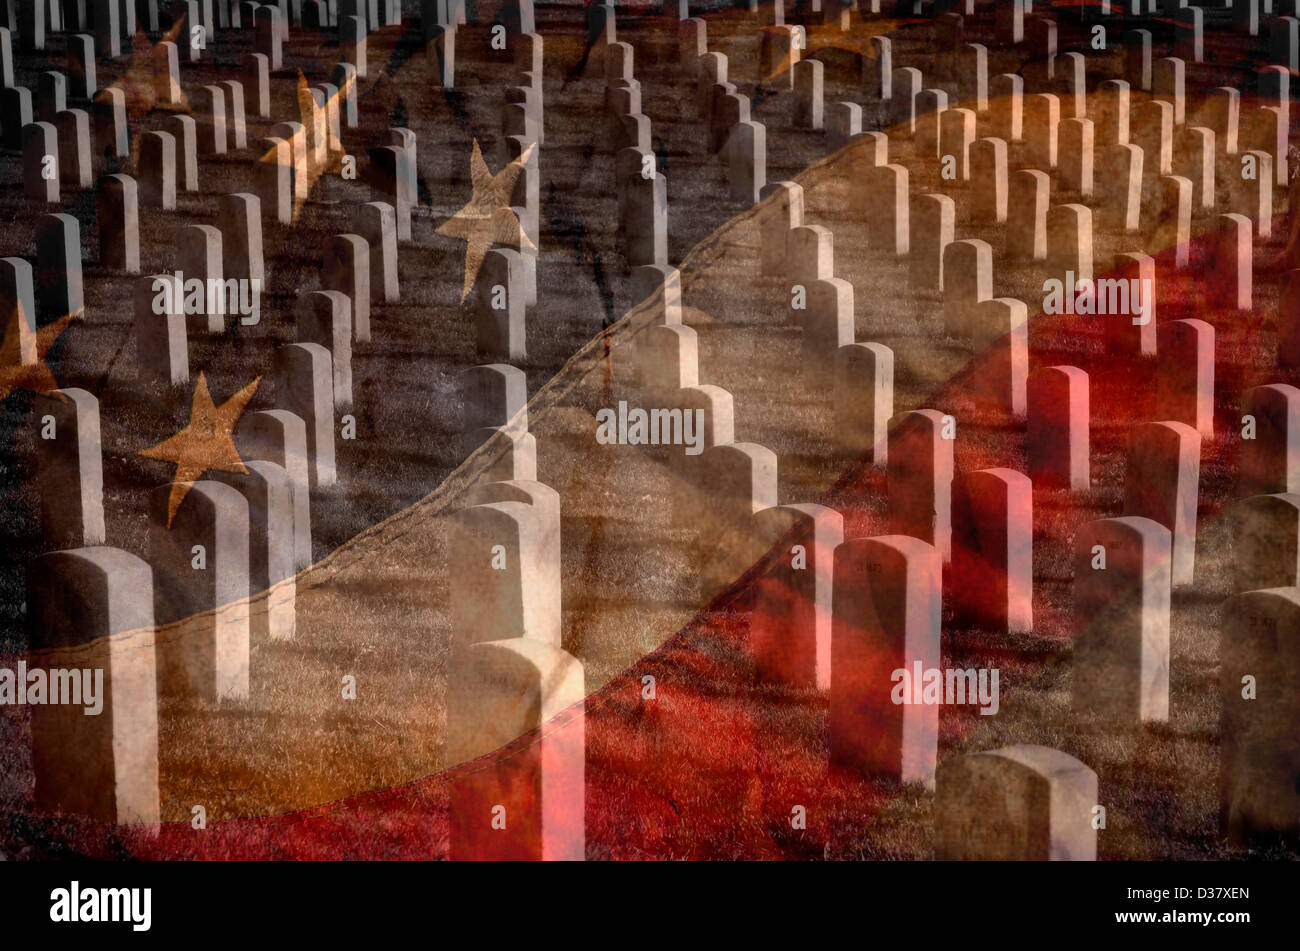 Arlington Cemetery and Grave Stones of Fallen Soldiers with Faded Flag Stock Photo